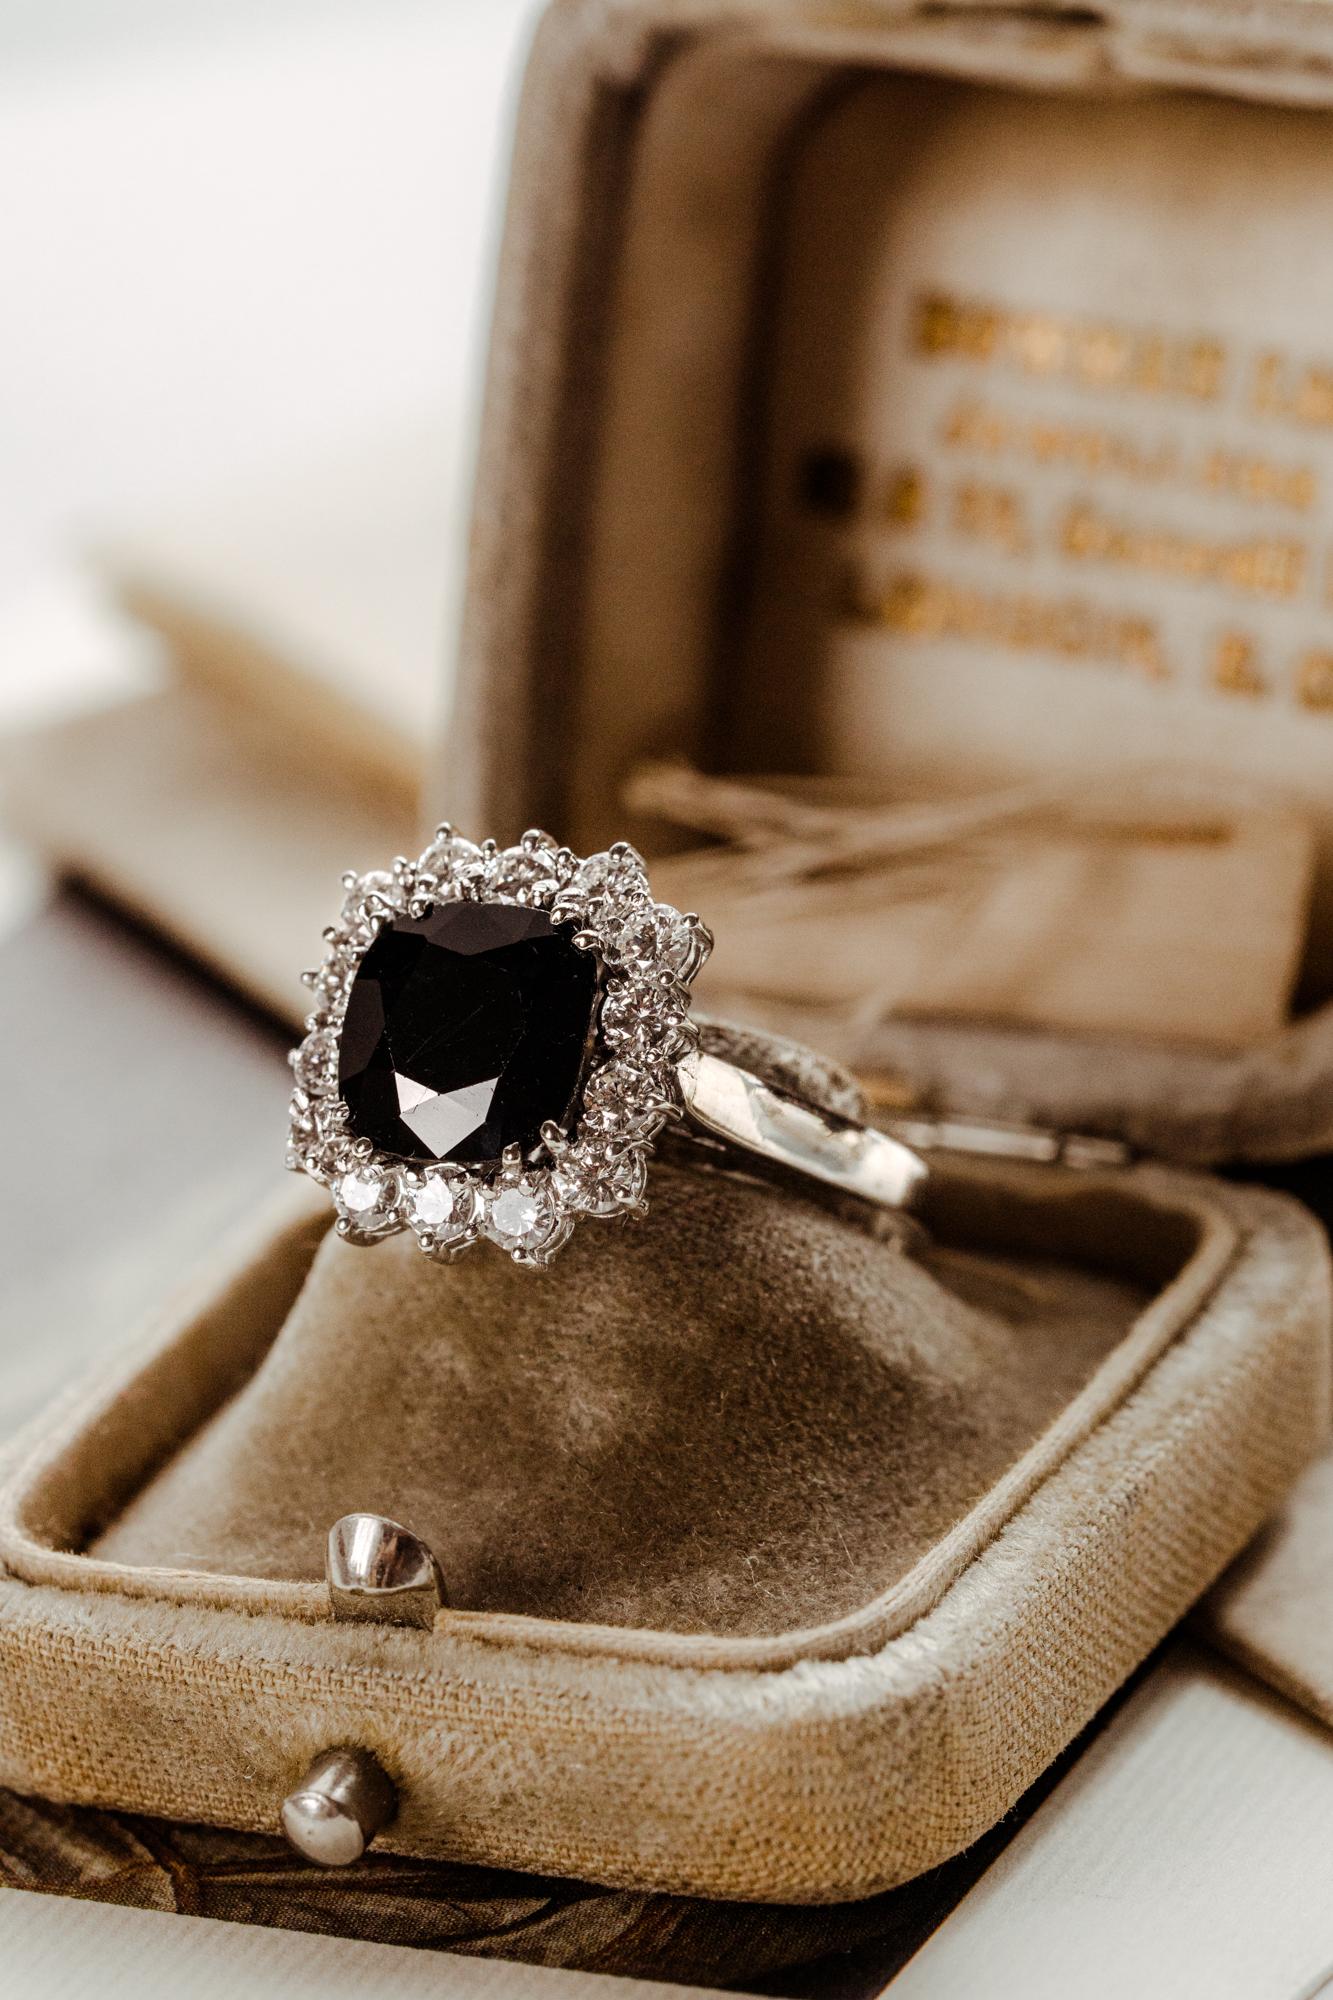 An incredible important 3.5 carat natural sapphire ring. This fine vintage engagement ring is crafted in 18k white gold and is fully certified.

Surrounded by a sparkling halo of 14 brilliant cut diamonds, the central cushion cut sapphire has a rich